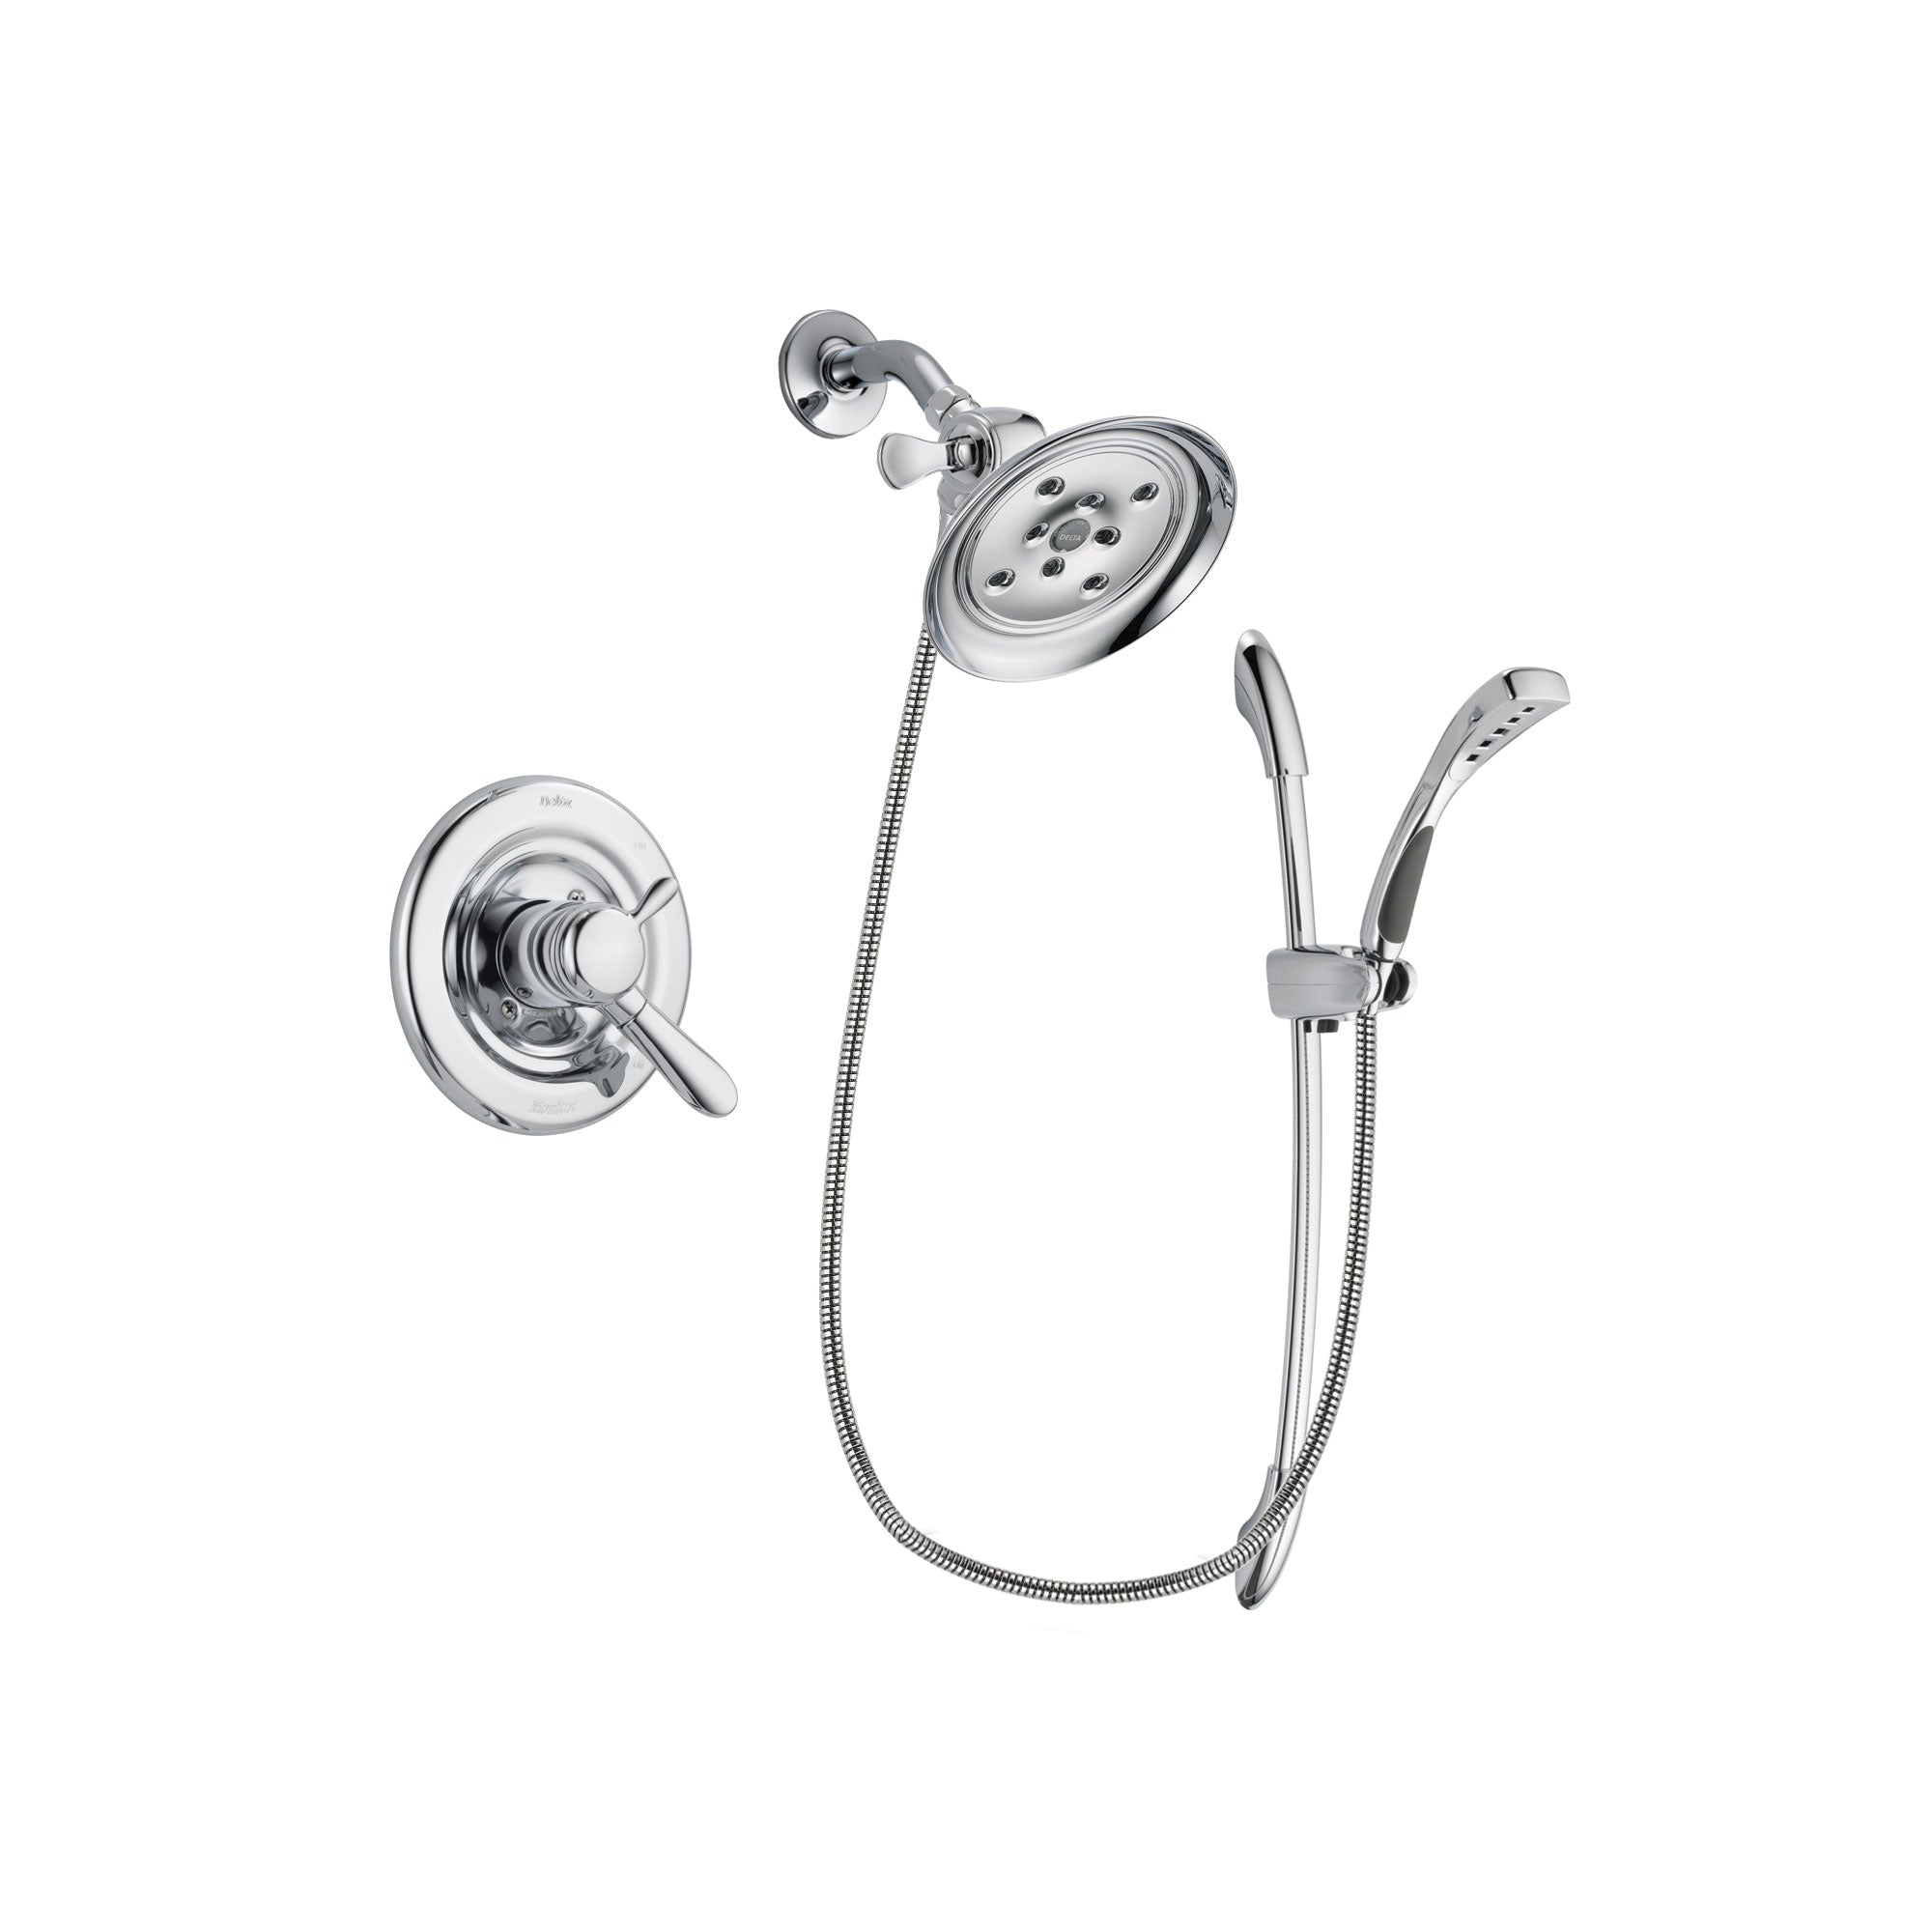 Delta Lahara Chrome Finish Dual Control Shower Faucet System Package with Large Rain Showerhead and Handheld Shower with Slide Bar Includes Rough-in Valve DSP0514V